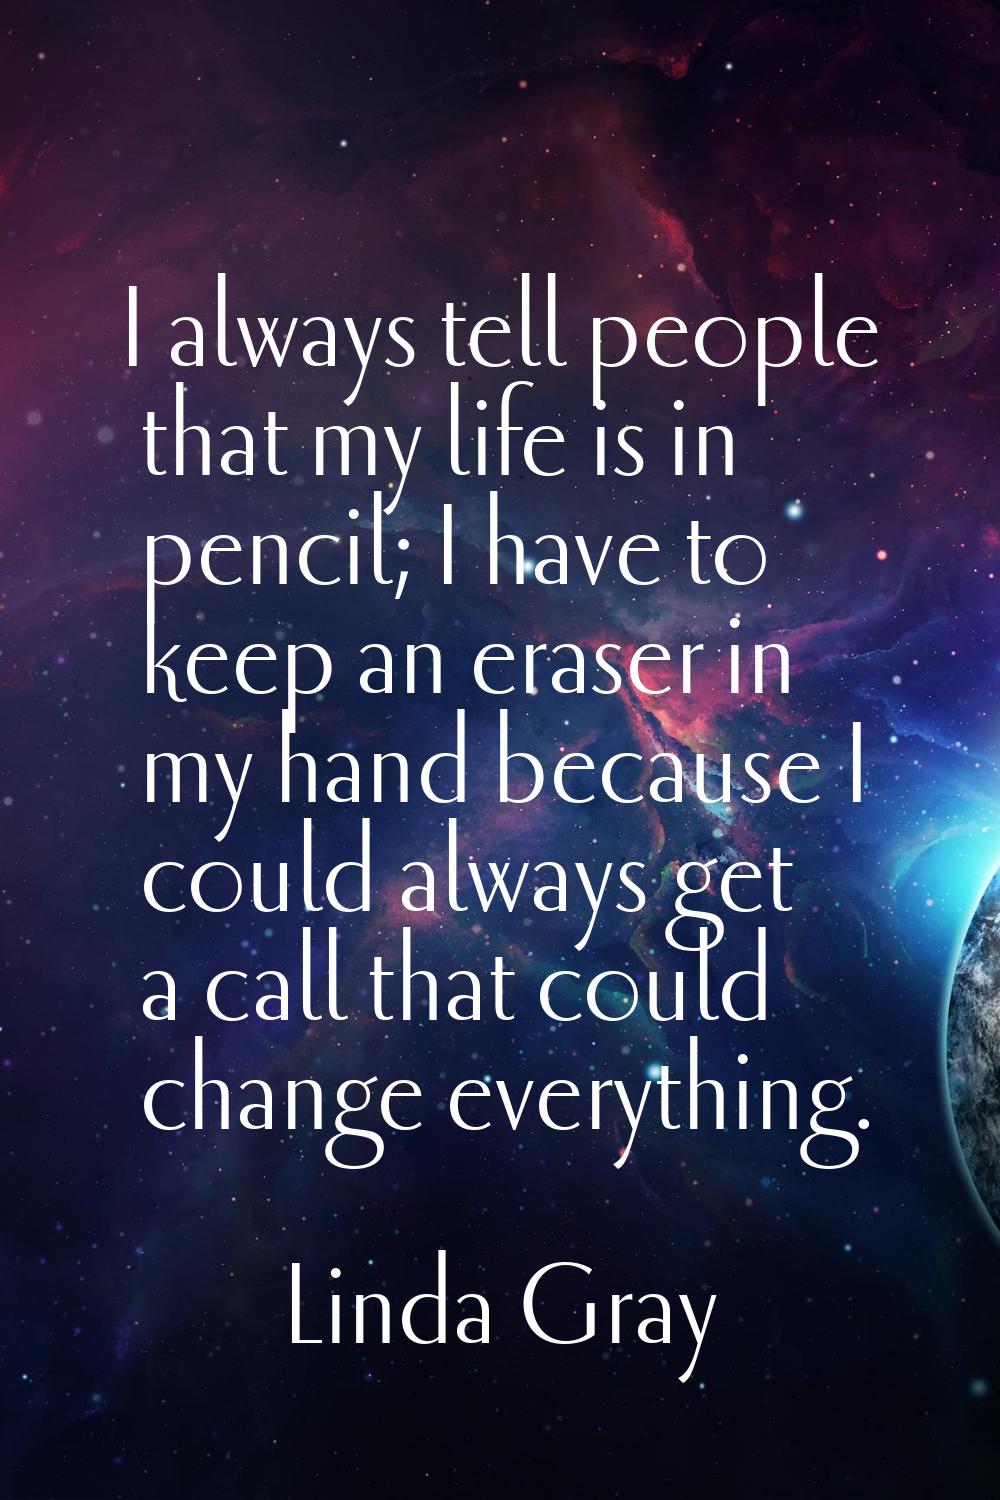 I always tell people that my life is in pencil; I have to keep an eraser in my hand because I could